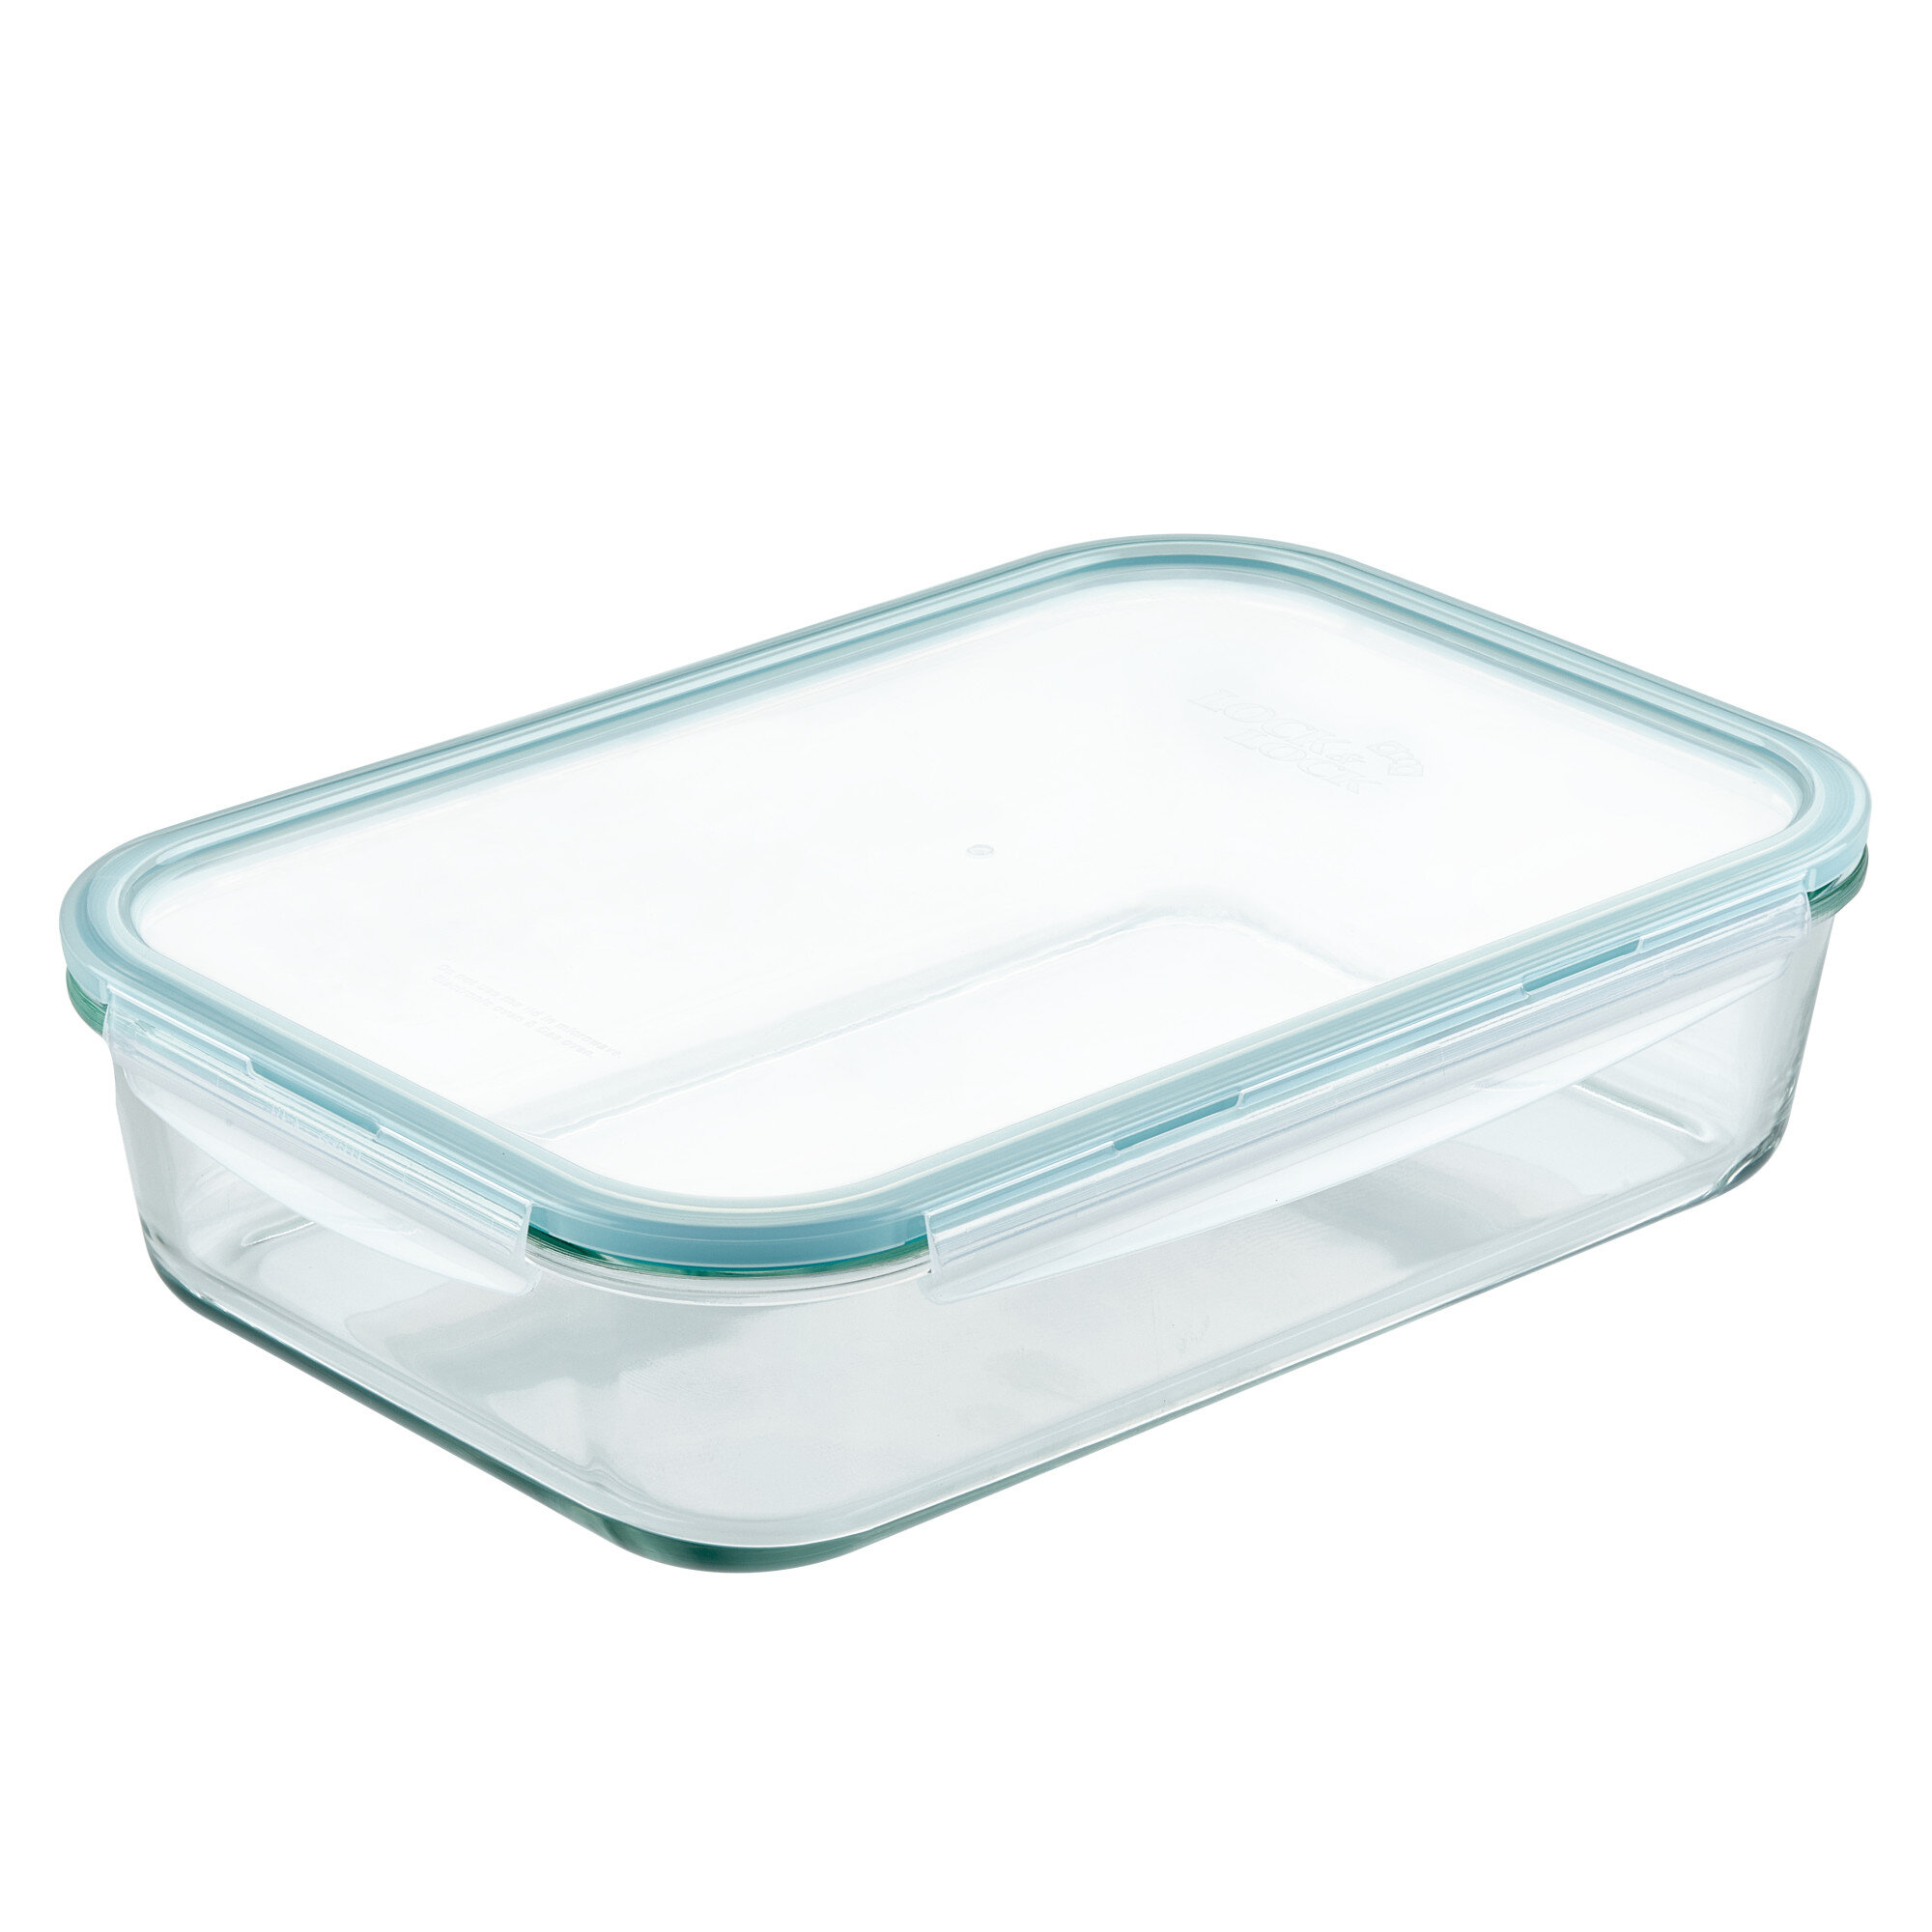 Lock & Lock Purely Better Glass 3 Qt. Rectangular with Lid